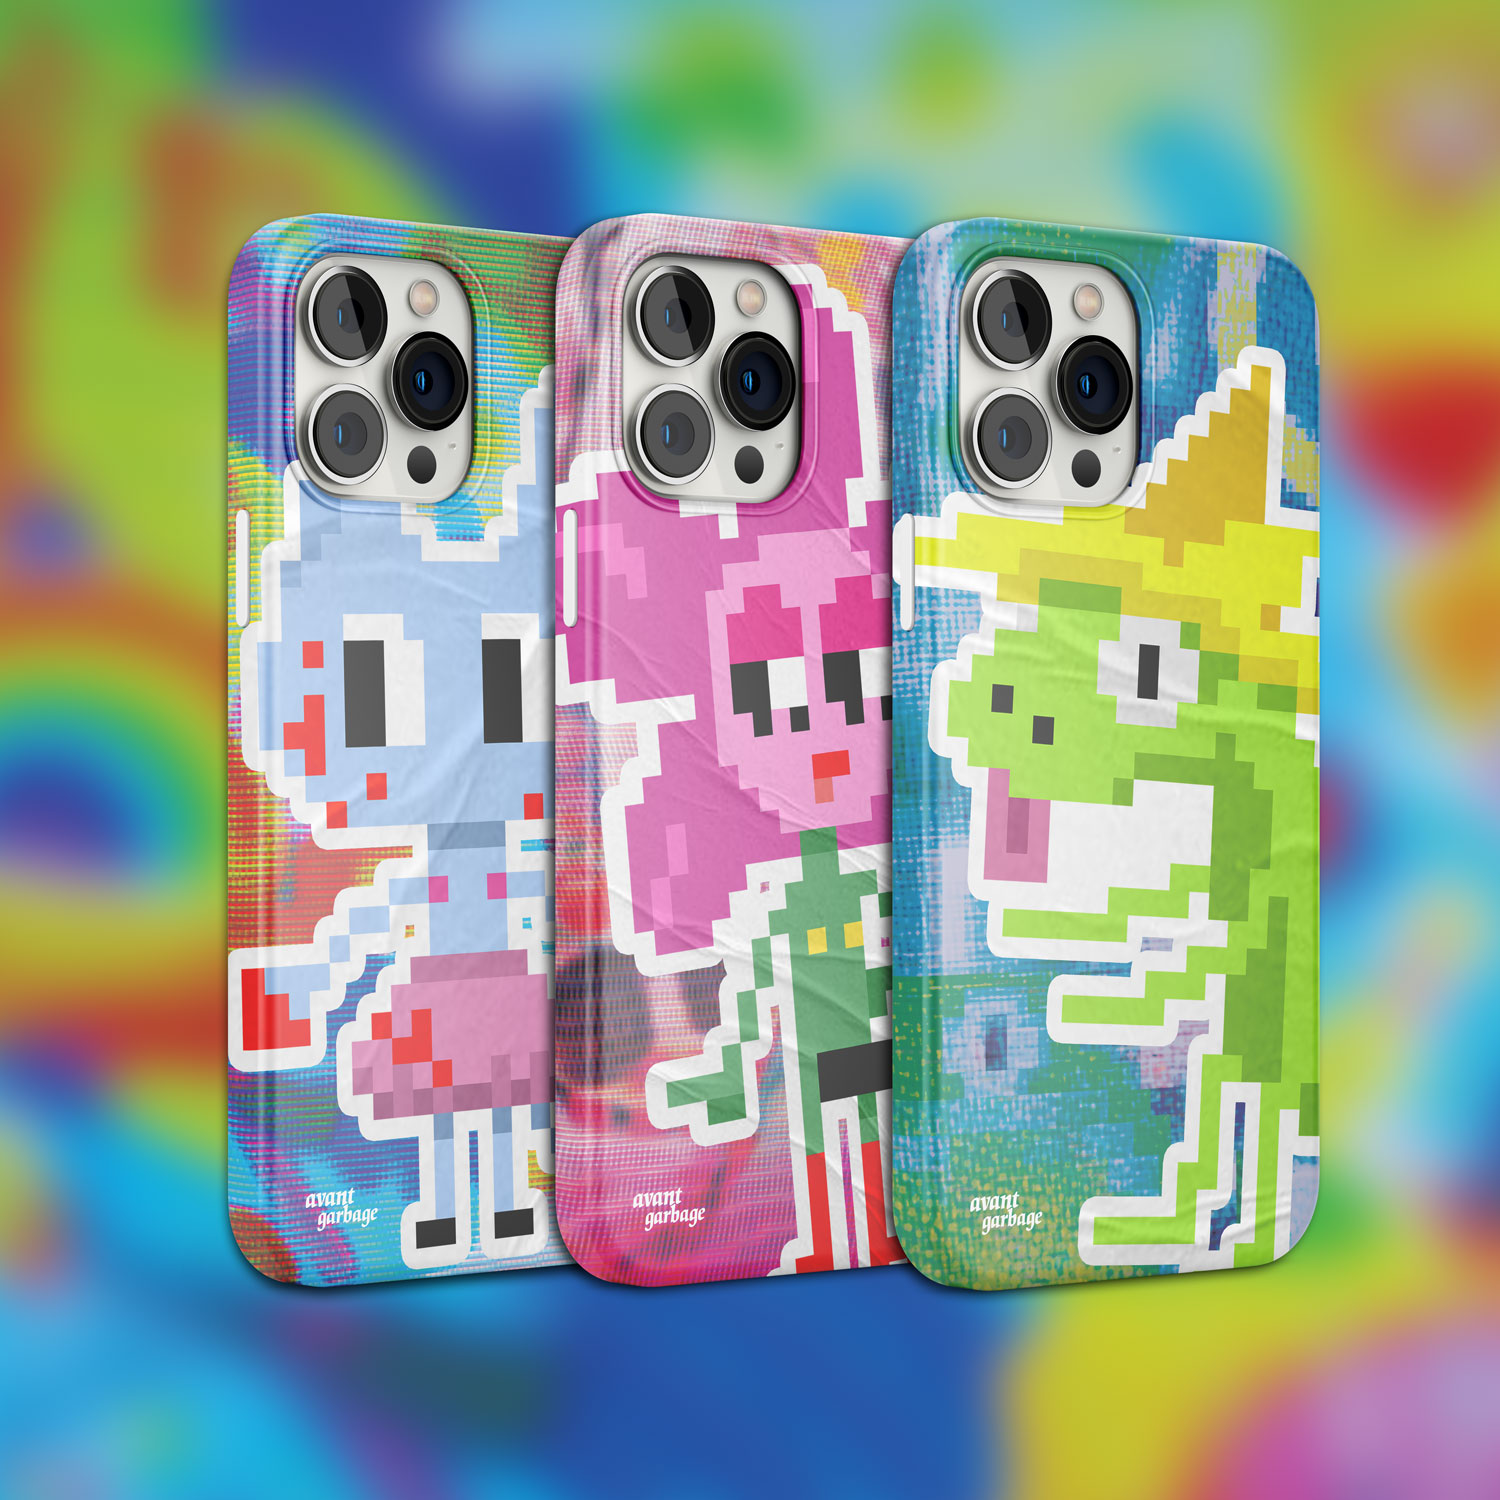 Mockup of three iphone case designs with different collage backgrounds with a pixel art character in the center.